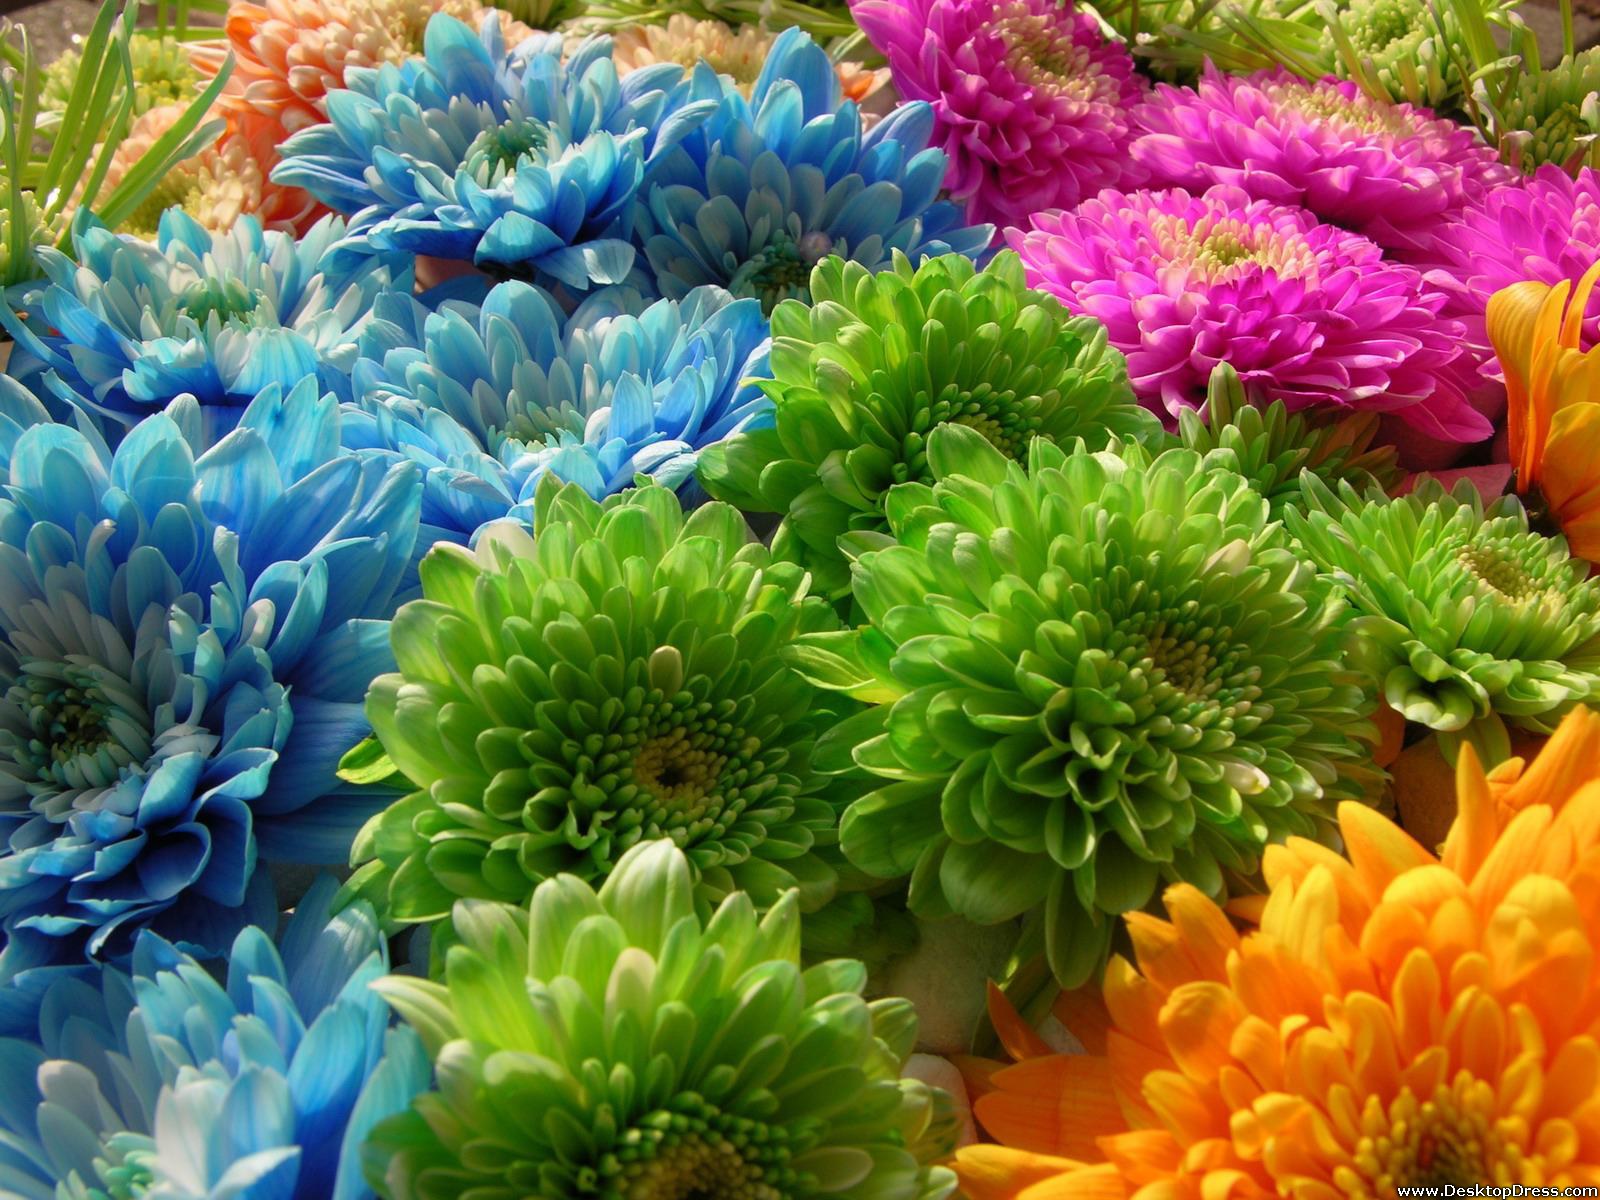 Desktop Wallpapers » Flowers Backgrounds » Green and Blue Flowers ...